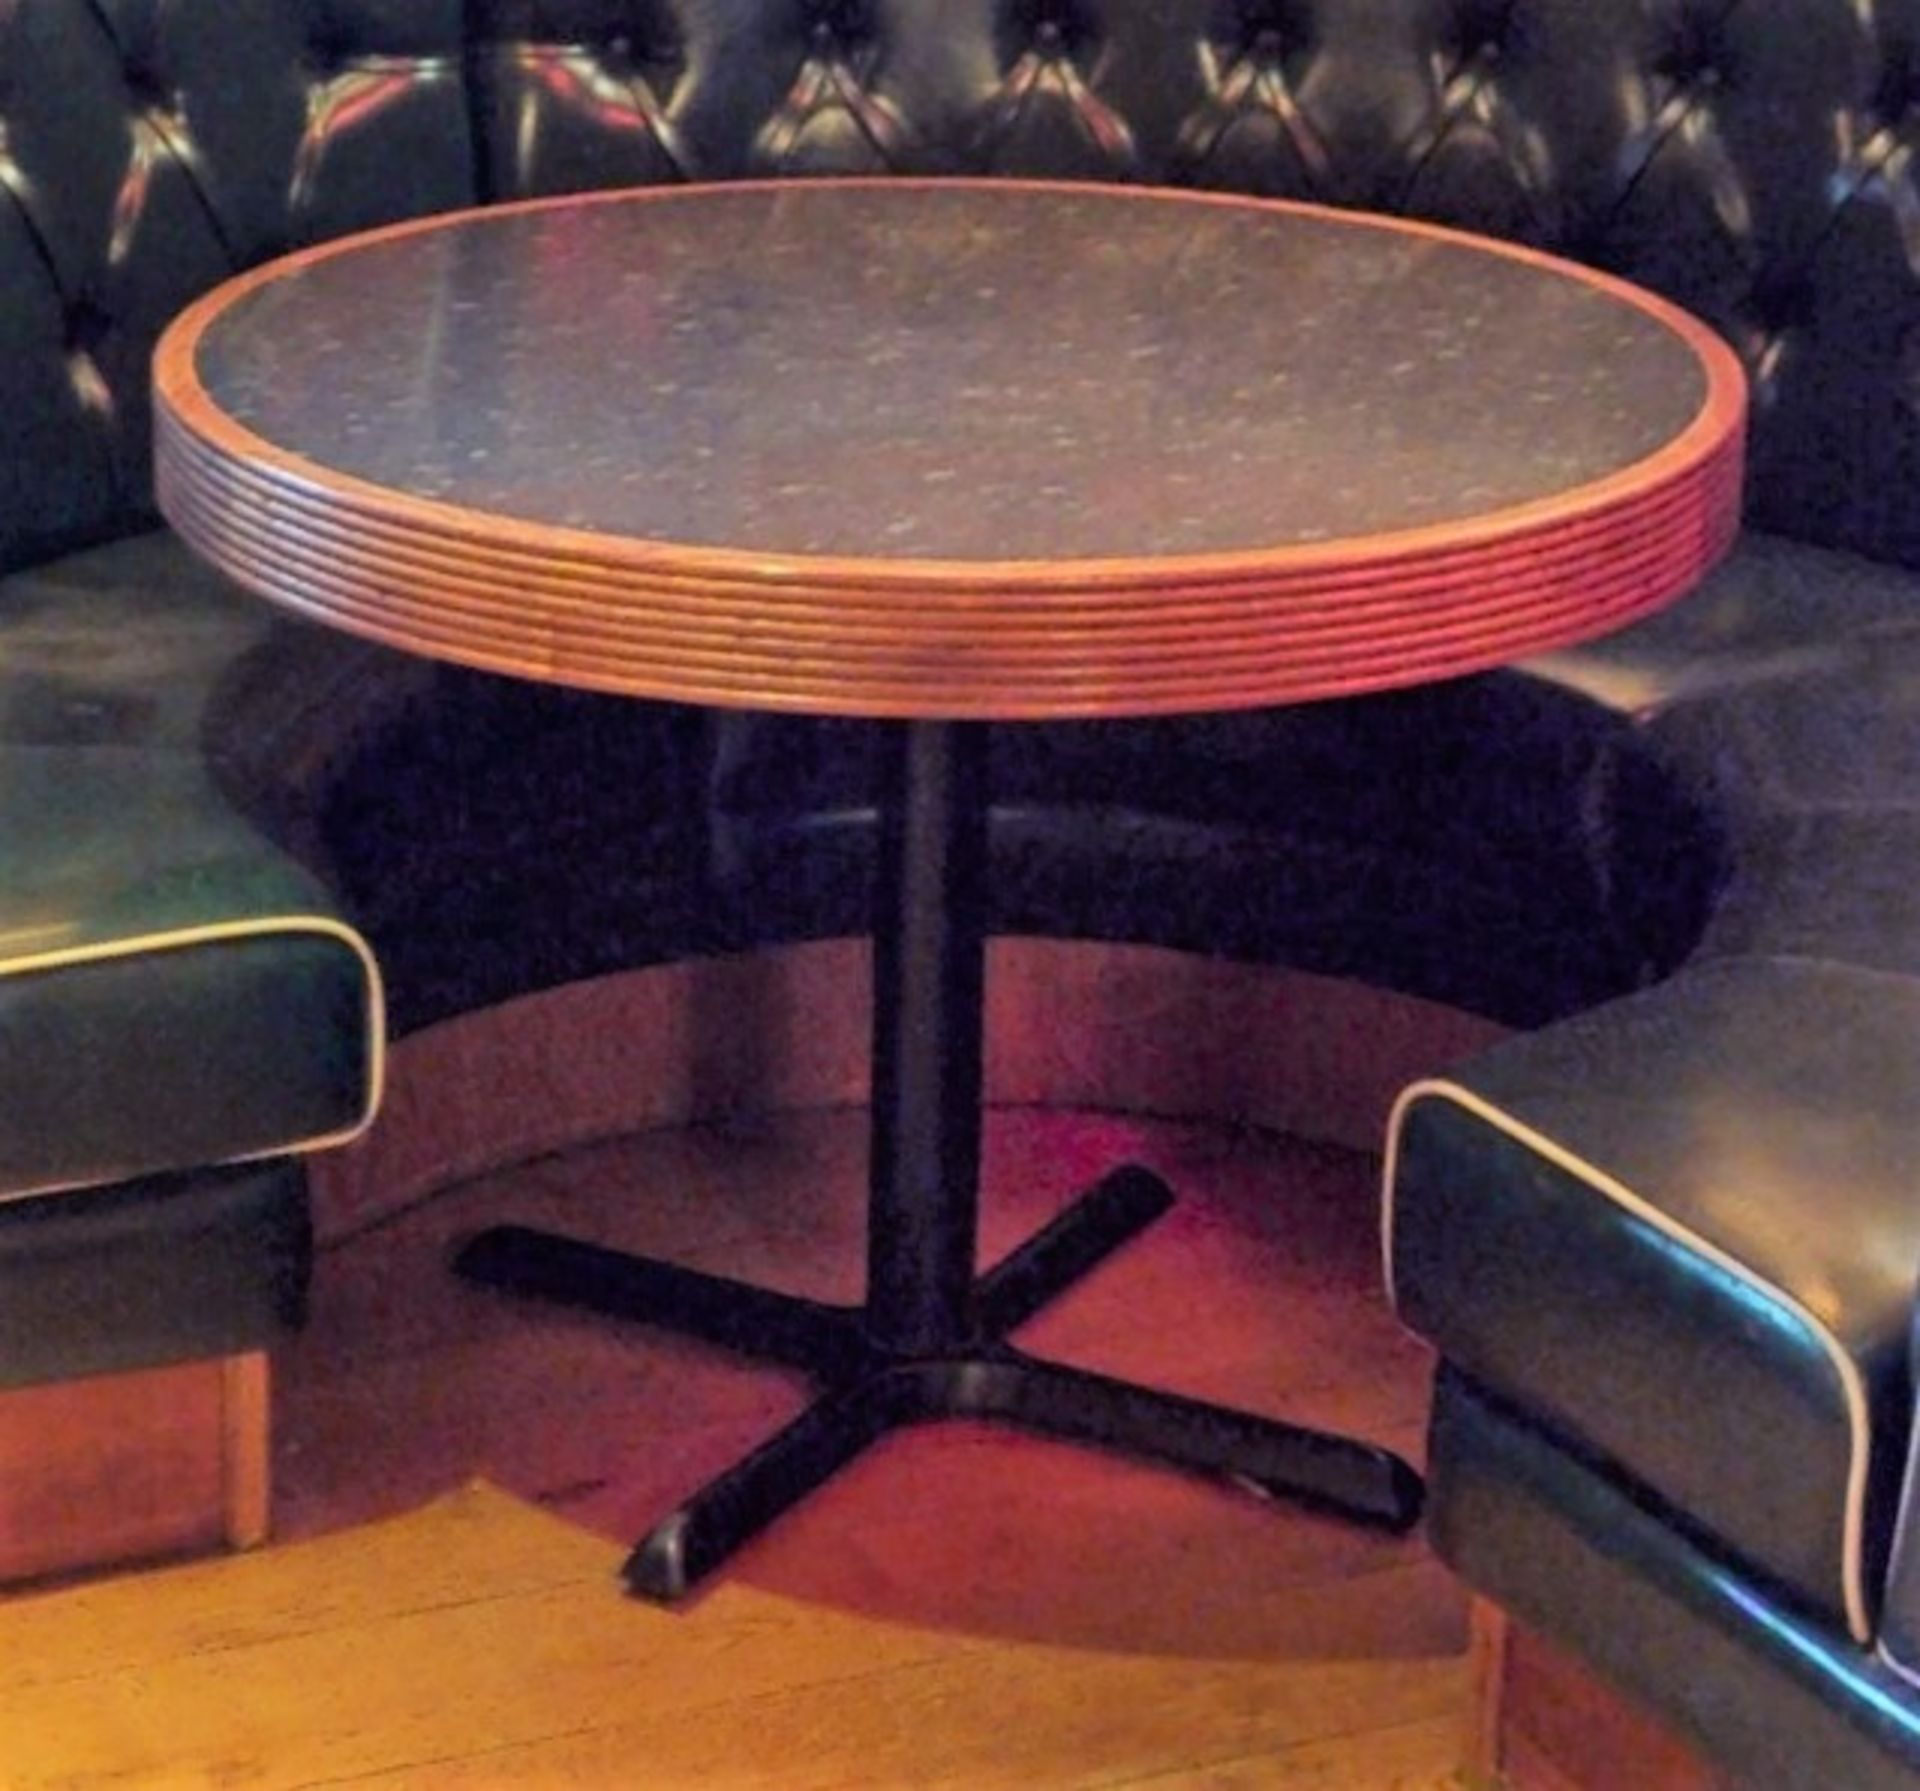 6 x Assorted Restaurant Dining Tables With Granite Style Surface, Wooden Edging and Cast Iron - Image 2 of 6